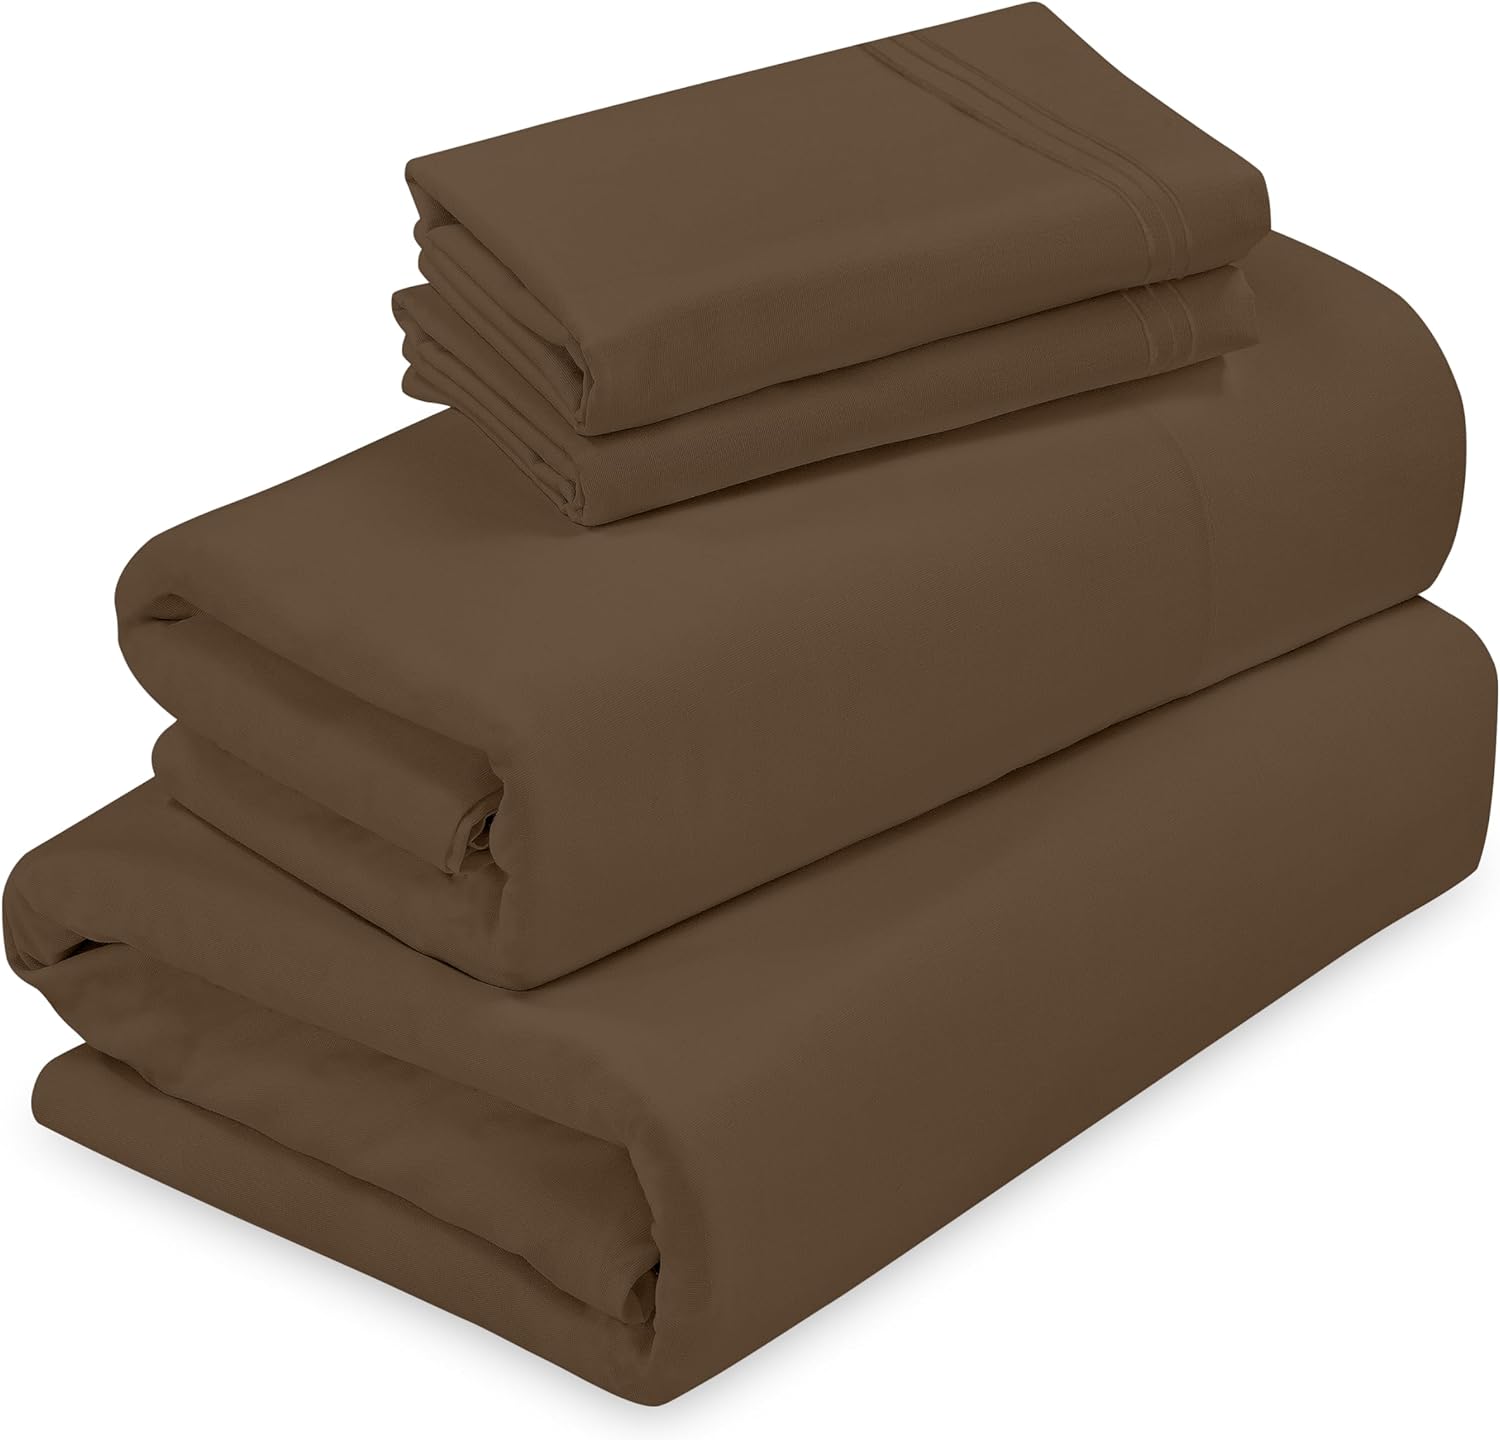 ROYALE LINENS - 4 Piece California King Bed Sheet - Brushed Microfiber 1800 Bedding - 1 Fitted Sheet, 1 Flat Sheet, 2 Pillow Case - Wrinkle & Fade Resistant Cal King Size Sheet Set (Kingcal,Chocolate)